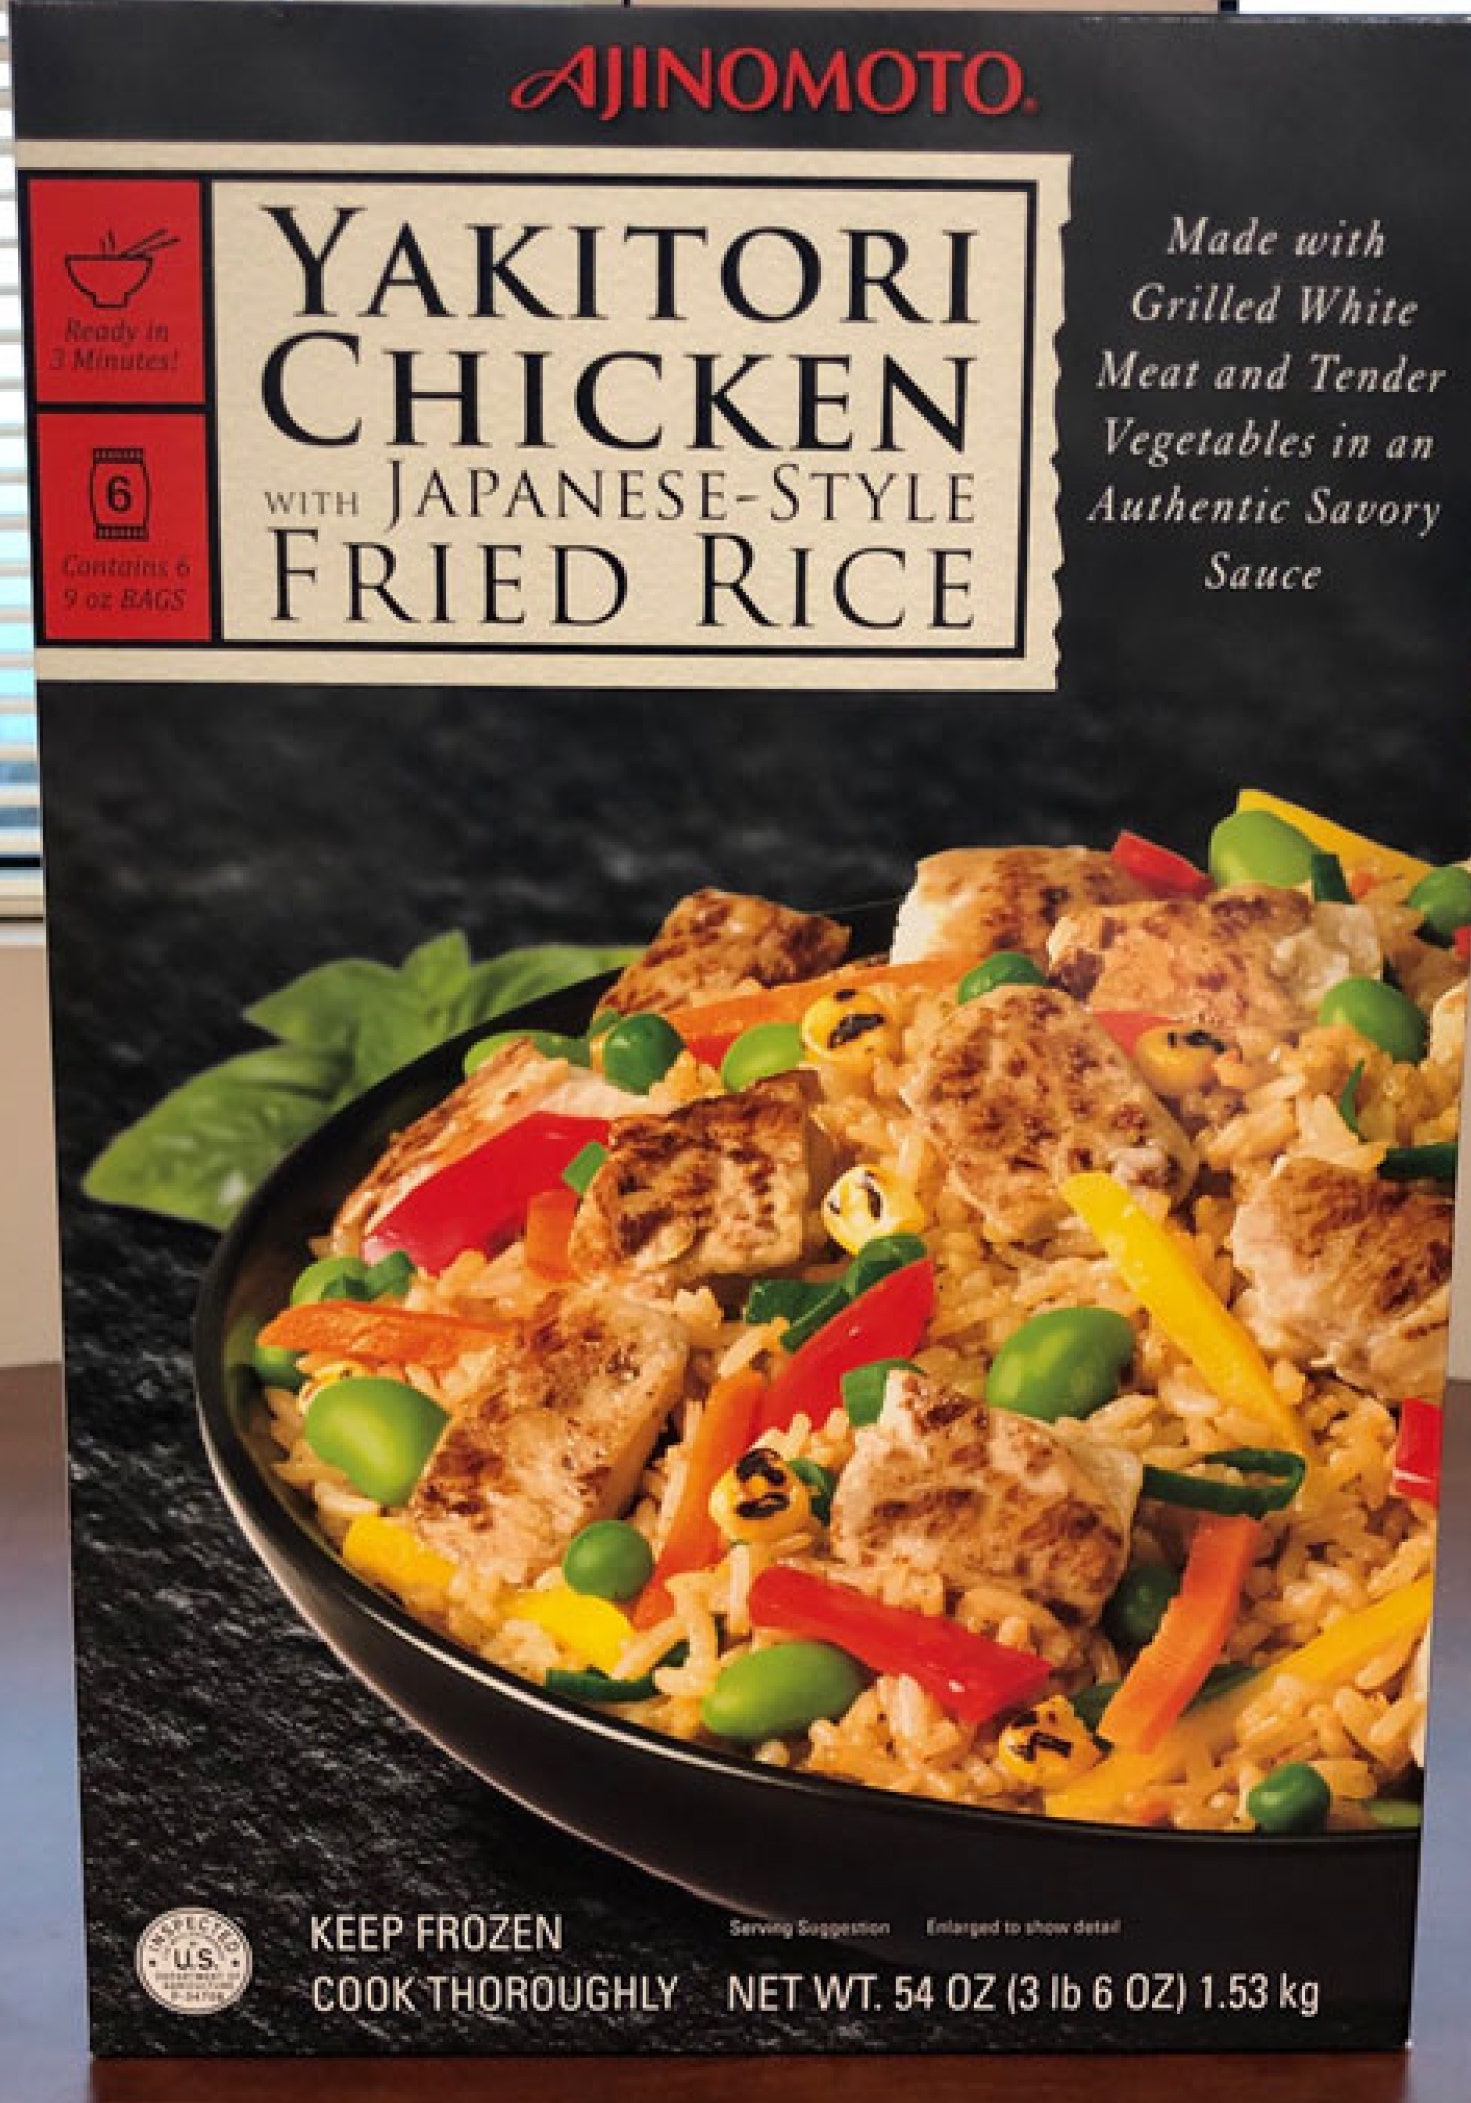 Frozen chicken fried rice recalled after consumers find plastic in